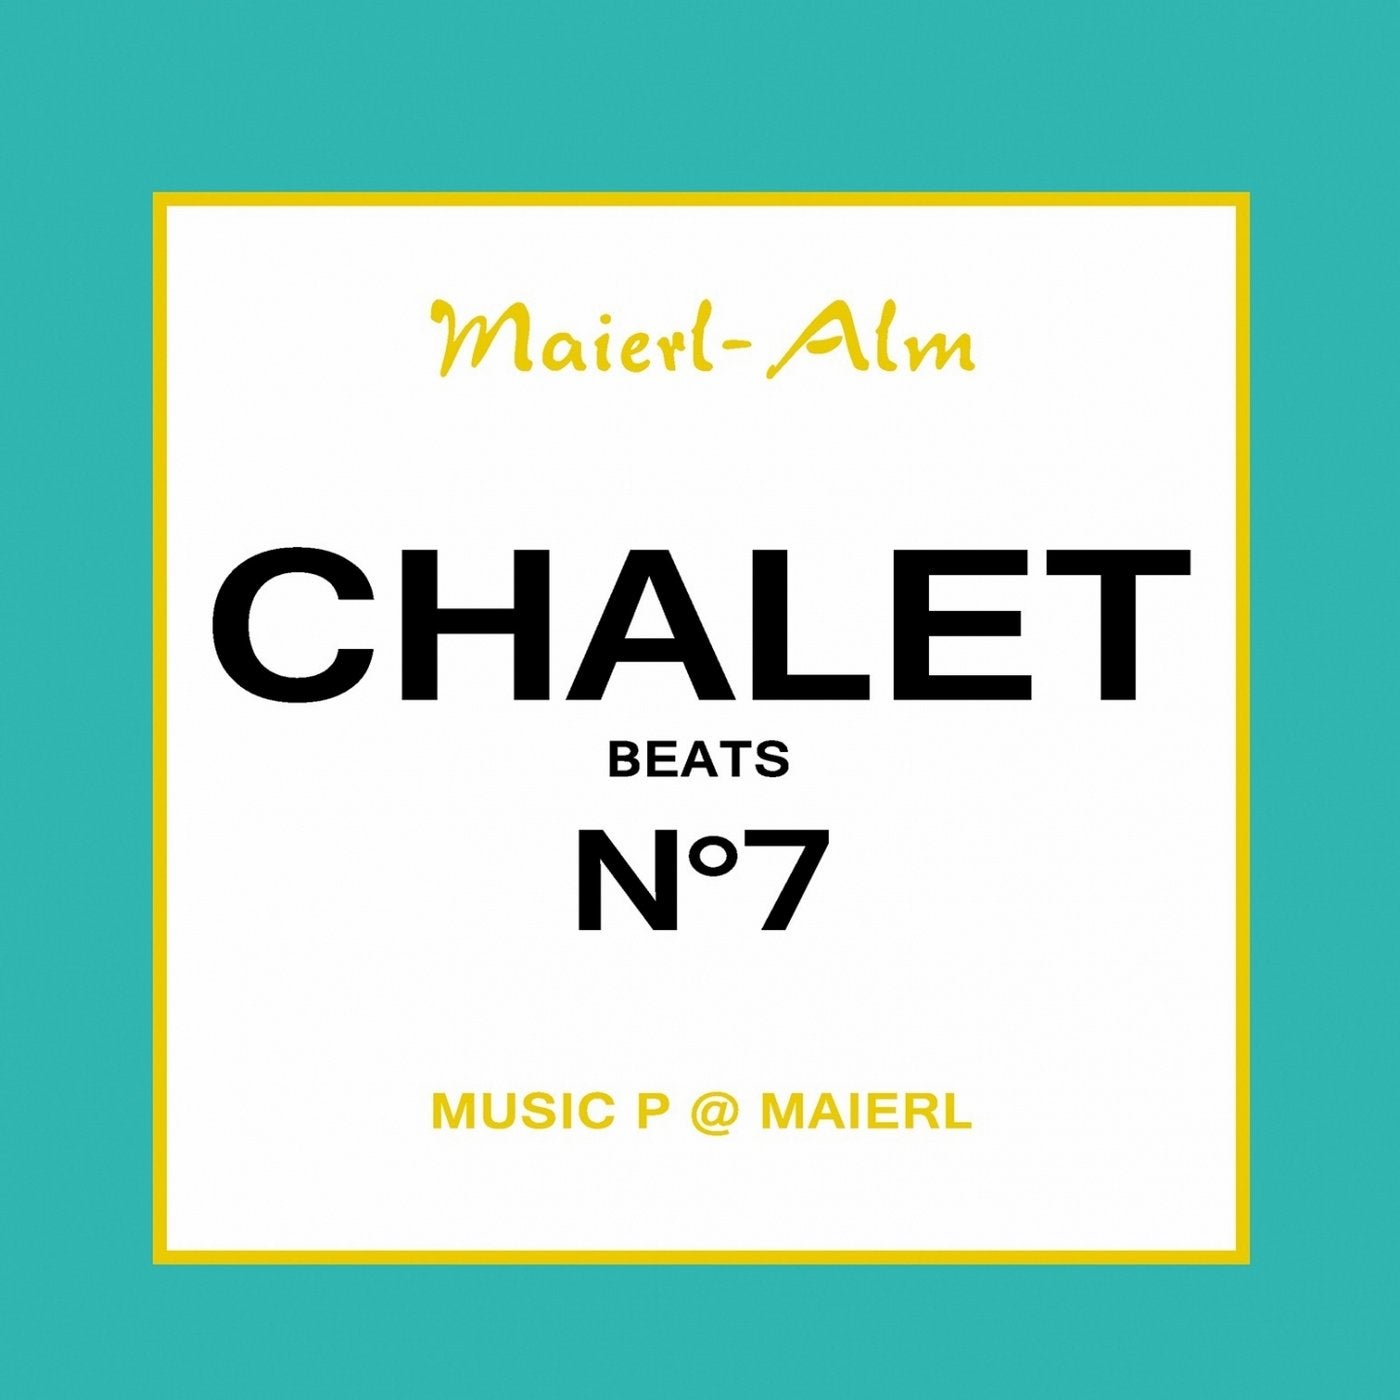 Chalet Beat No.7 - The Sound of Kitz Alps @ Maierl (Compiled by Music P)